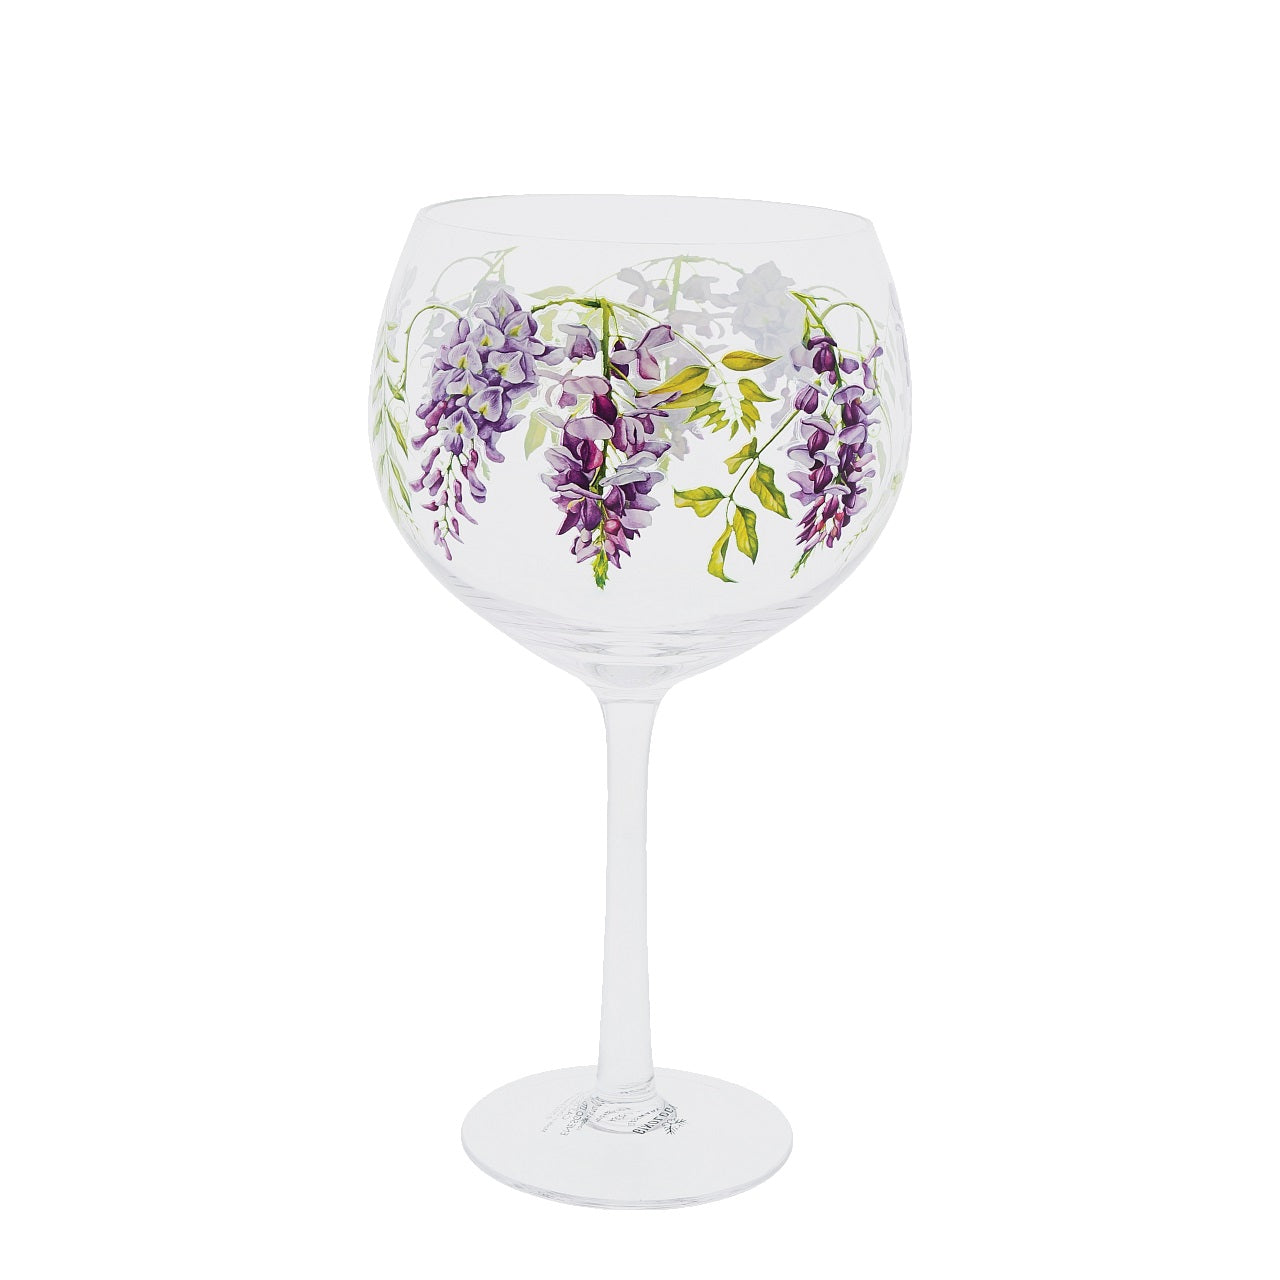 Ginology Wisteria Copa Gin Glass  In Japanese theatre Wisteria represents love, support and sensitivity, the complete gift for a loved one, someone needing a pick me up or to show you're there. Complete the gift with the recipients favourite drink to finish the ultimate gift. 